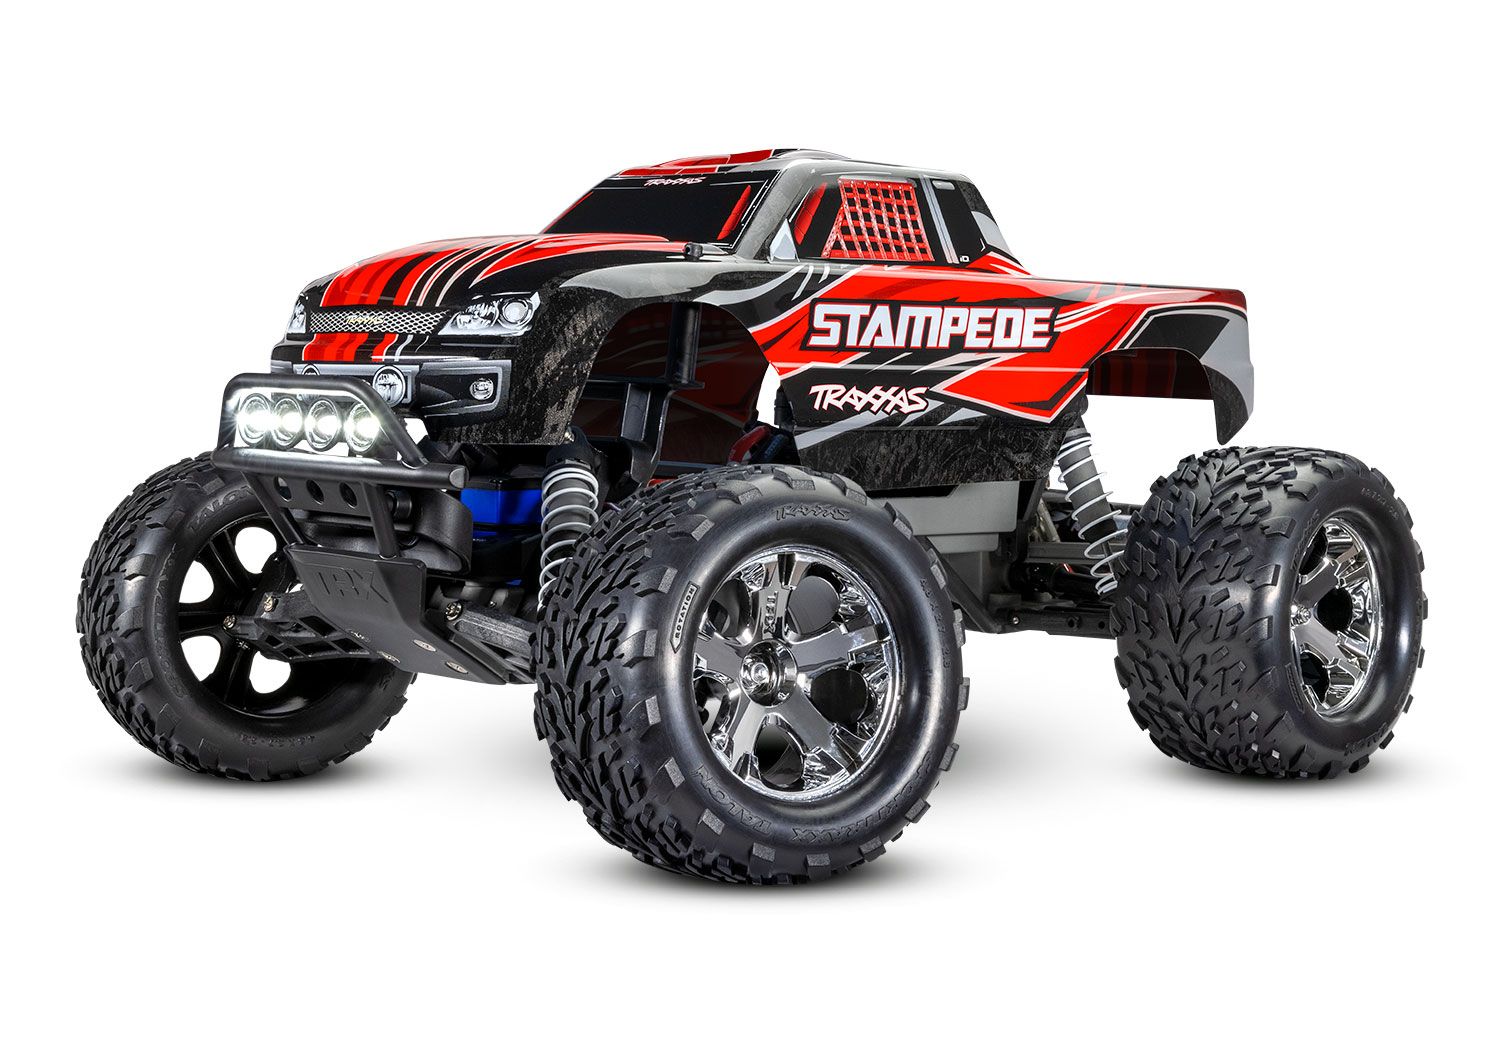 TRAXXAS 36054-61 Stampede 1/10 monster truck RTR, with TQ 2.4GHz radio, XL-5® ESC, 8.4V NiMH 3000 mAh Power Cell™ battery, 4-amp DC Fast Charger, LED lighting, and ProGraphix® painted body.